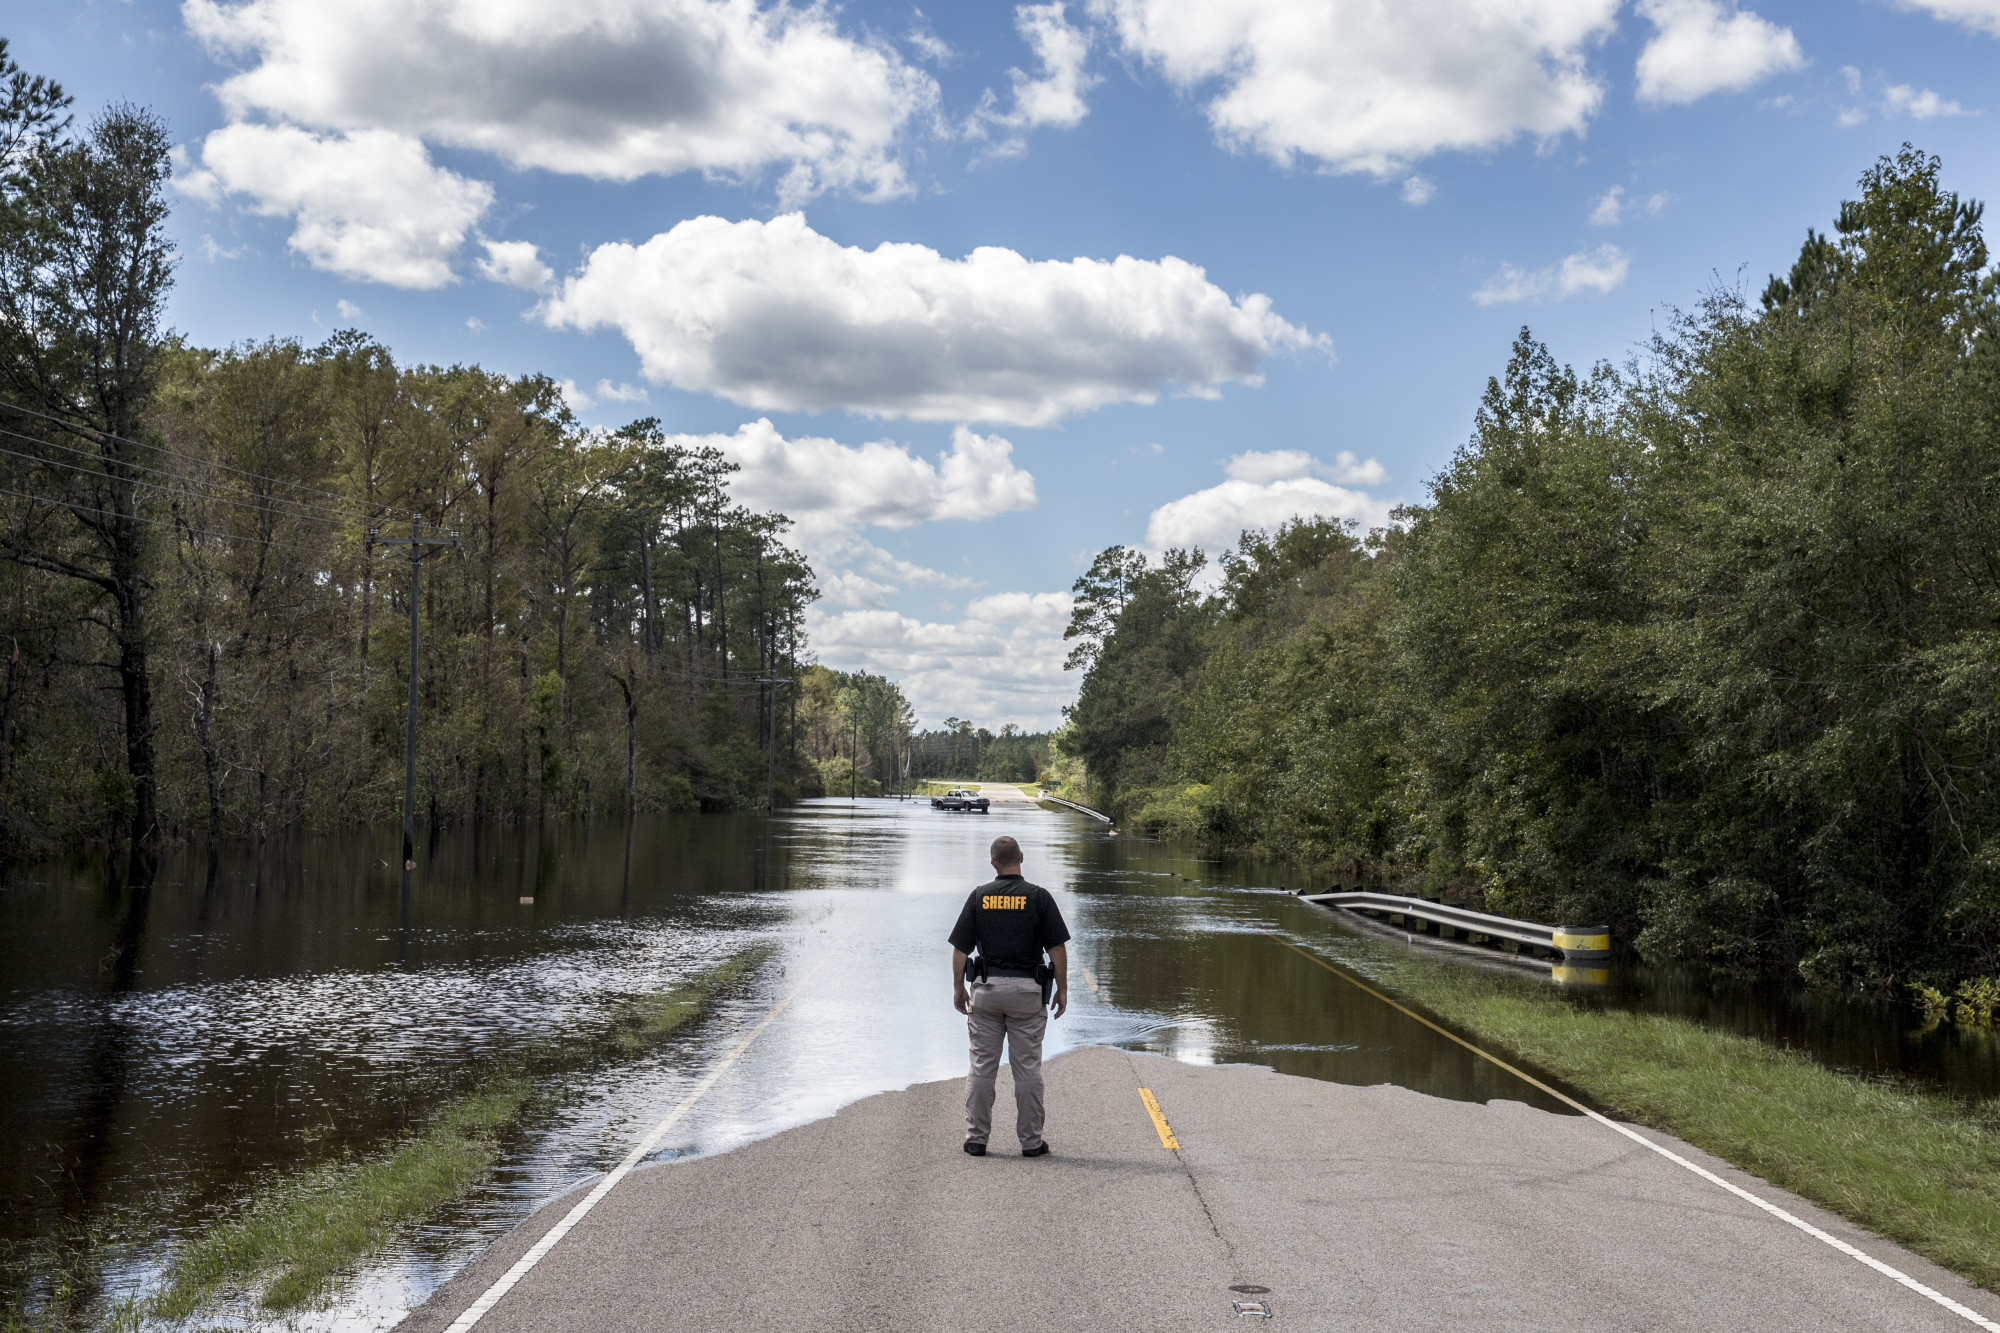 A Pender County Sheriff stands in front of a section of flooded road after Hurricane Florence hit in Currie, North Carolina, on&nbsp;Sept. 18, 2018.